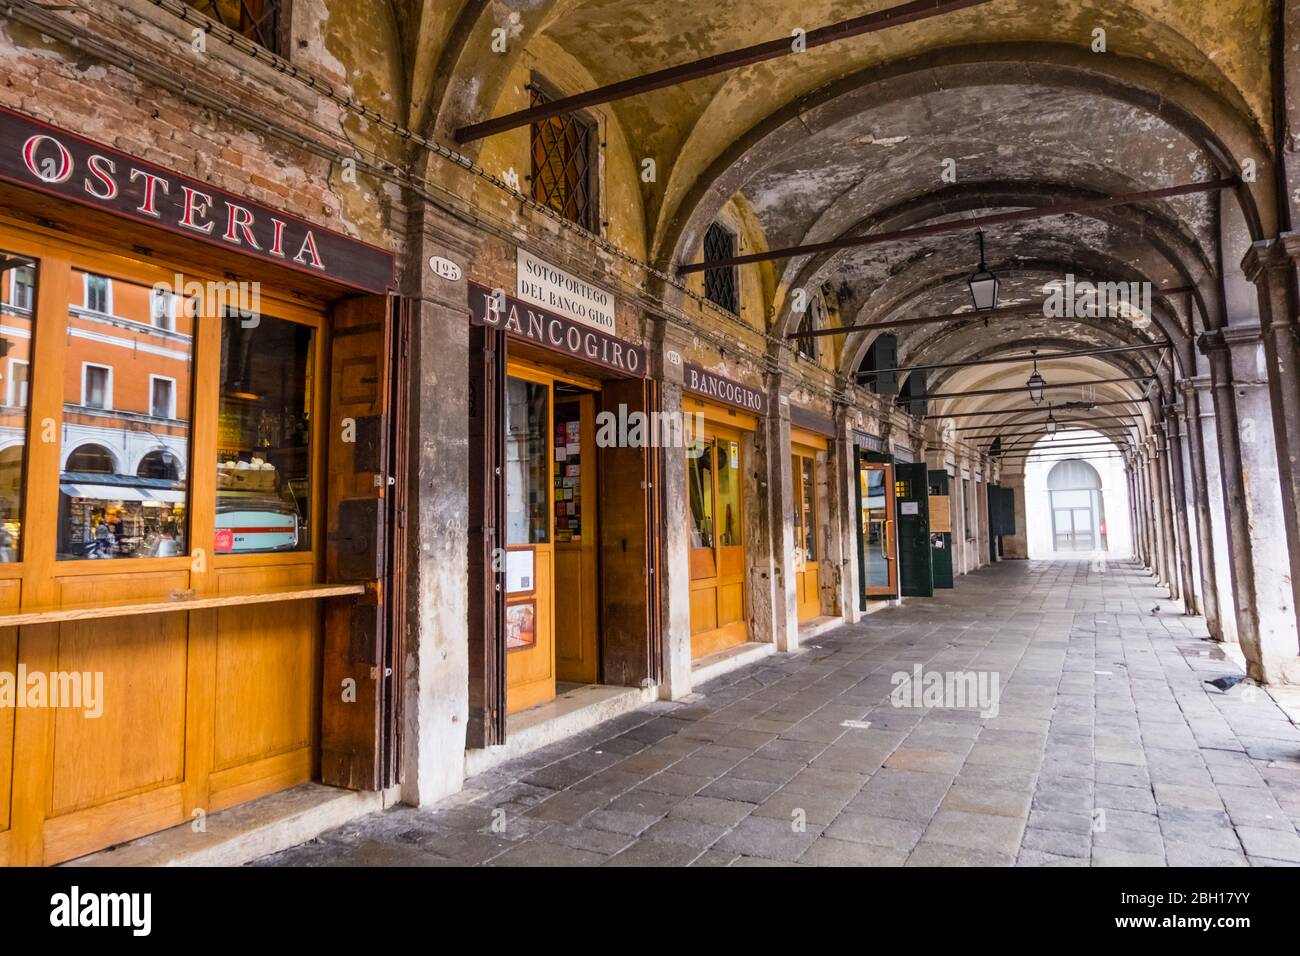 Restaurants and wine bars in vaulted passages, Rialto market, San Polo district, Venice, Italy Stock Photo